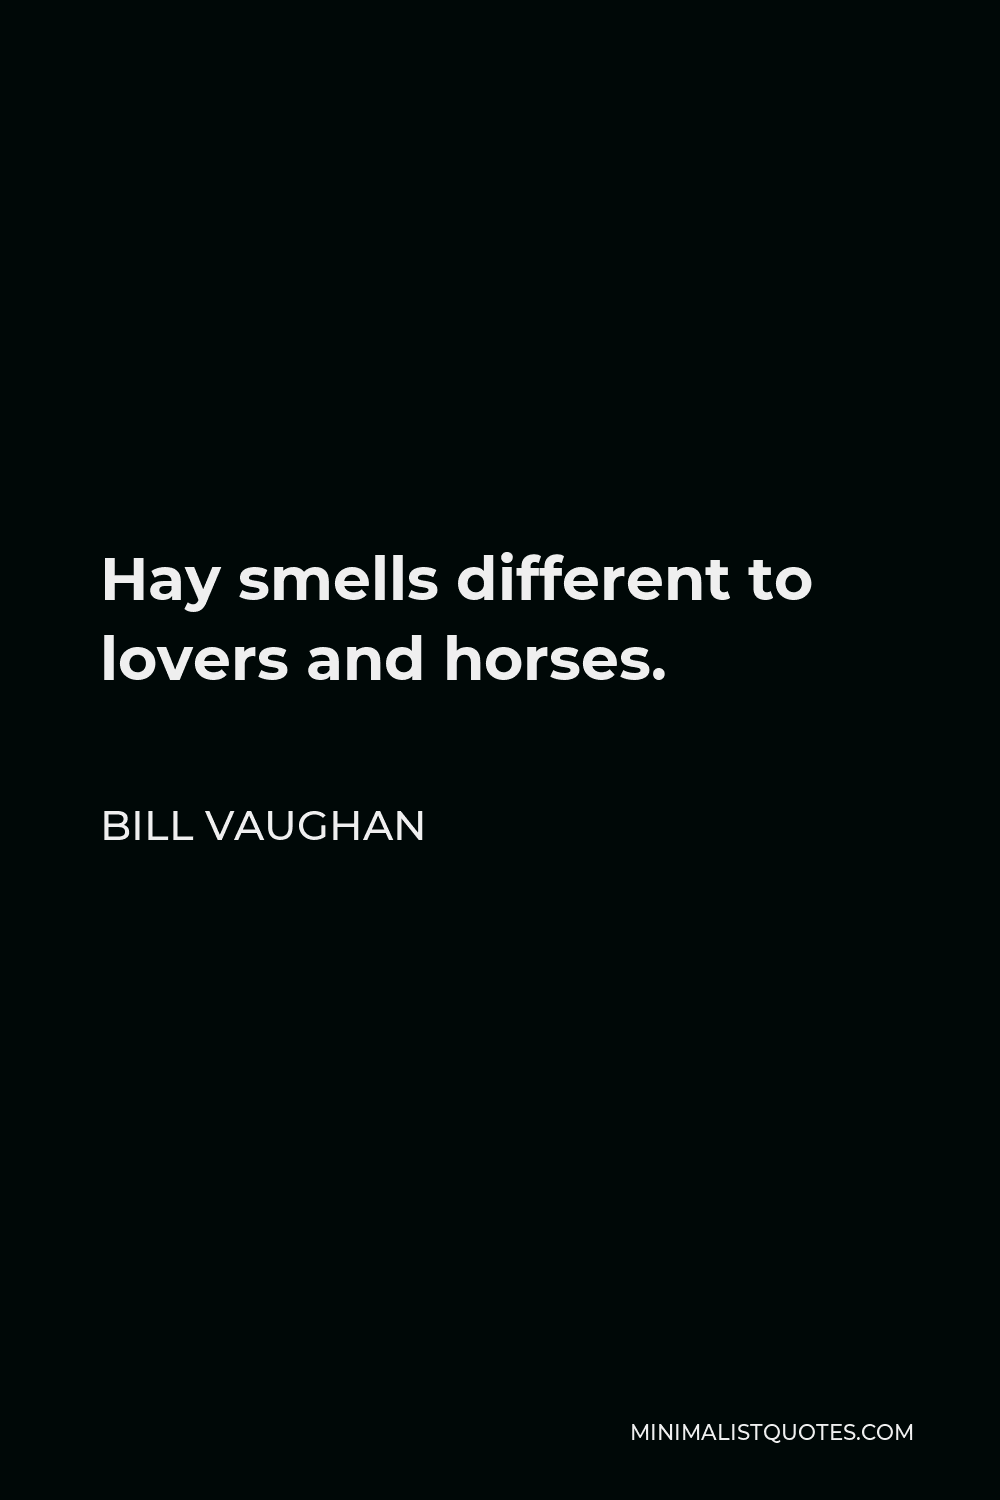 Bill Vaughan Quote - Hay smells different to lovers and horses.